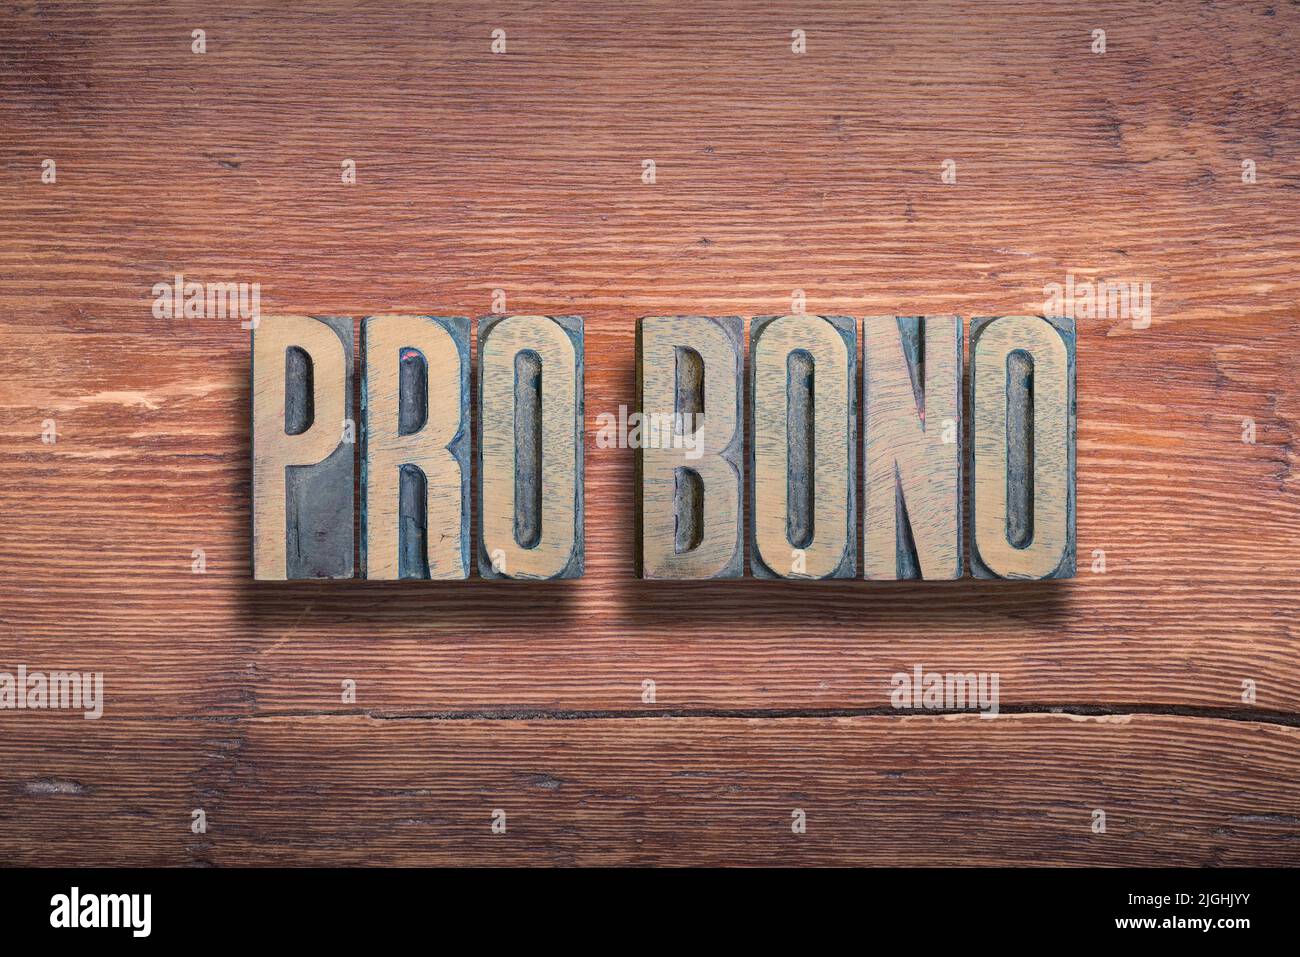 pro bono ancient Latin saying meaning - for the public good, combined on vintage varnished wooden surface Stock Photo